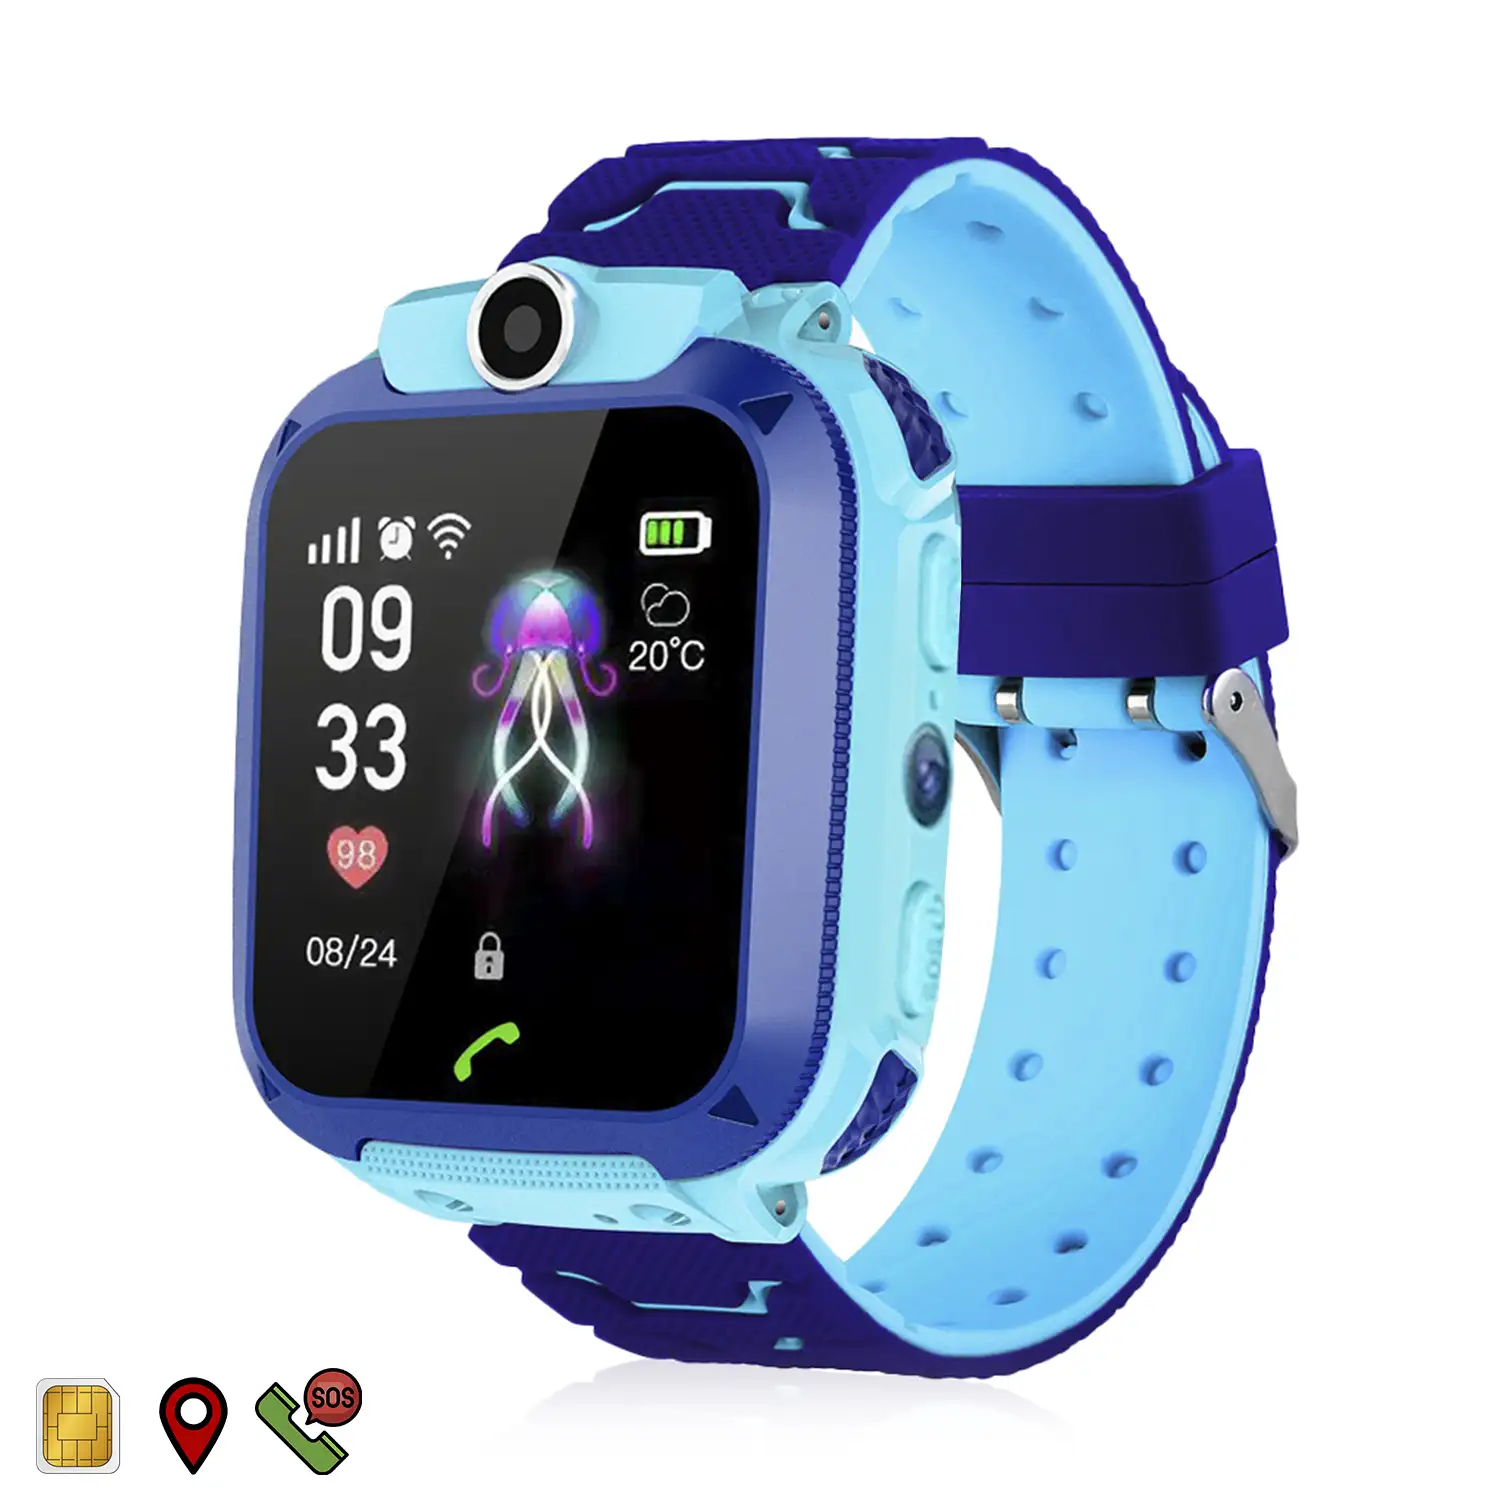 DWH5600-2, Blue Fitness Tracking Smartwatch, MIP LCD Watch